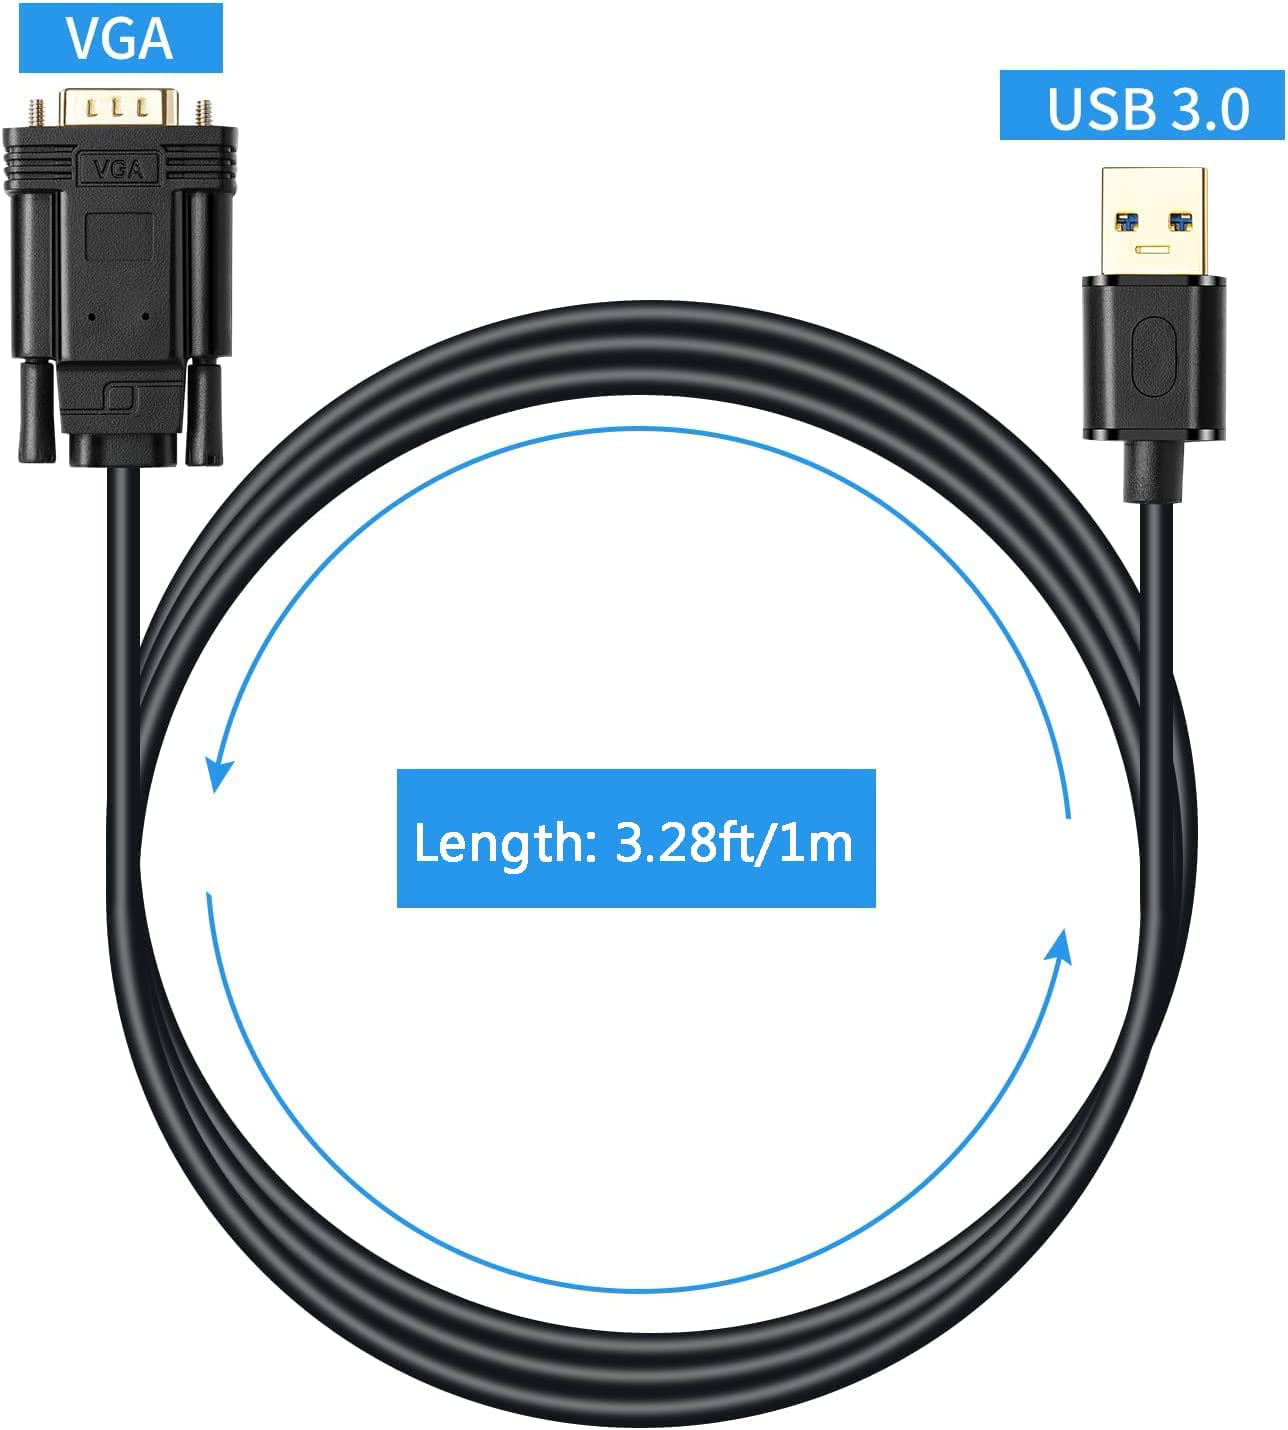 Nogen Vulkan vurdere USB 3.0 to VGA Cable, USB to VGA Adapter Cord, 1080P@60Hz USB A 3.0 Male to  VGA Male Cable, Monitor Video Display - Walmart.com